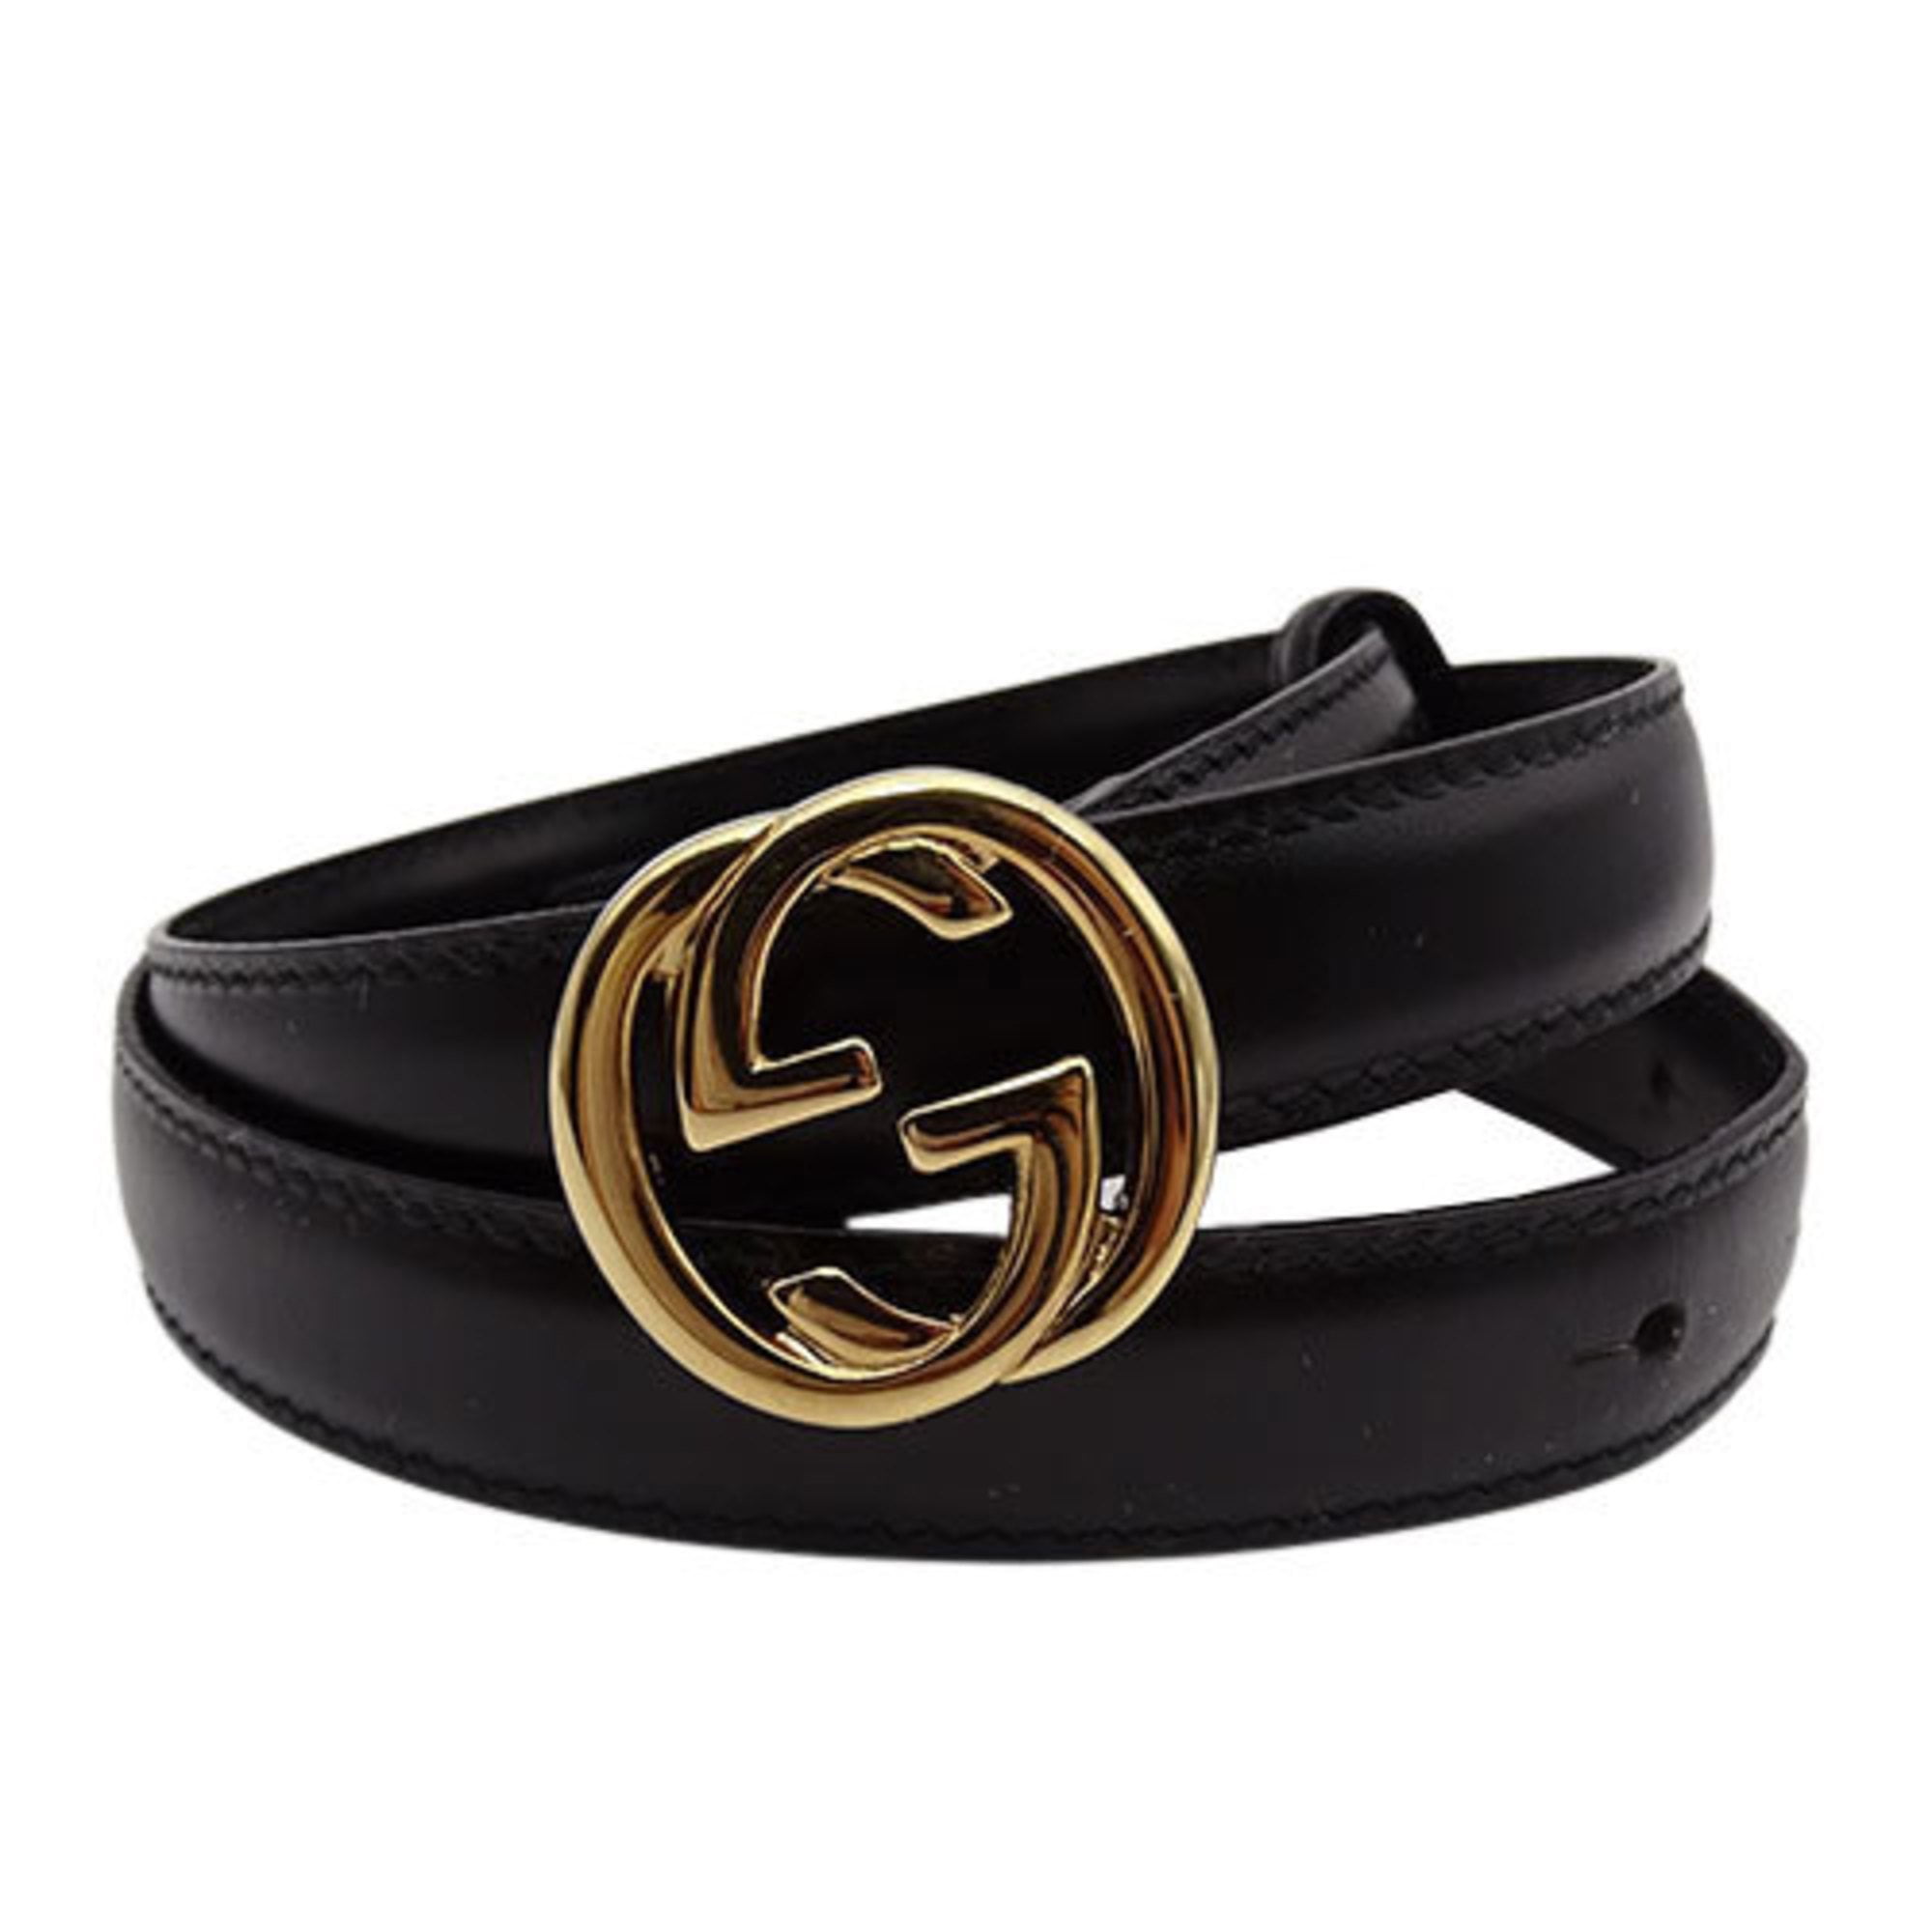 Authenticated Used Gucci GUCCI belt women's leather interlocking black ...